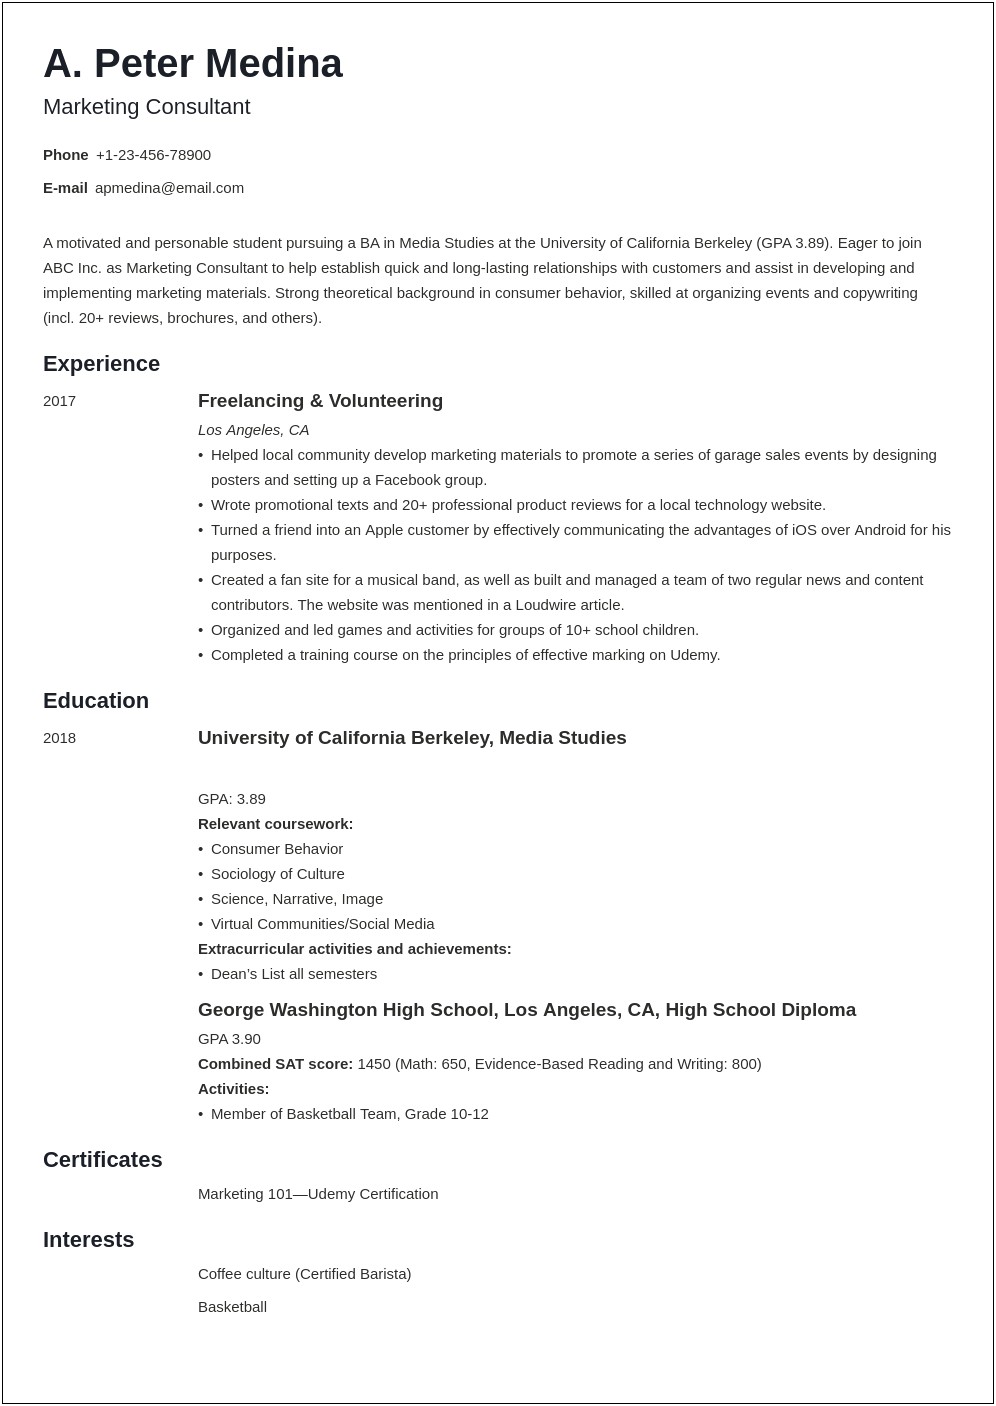 Career Objective For High School Student Resume